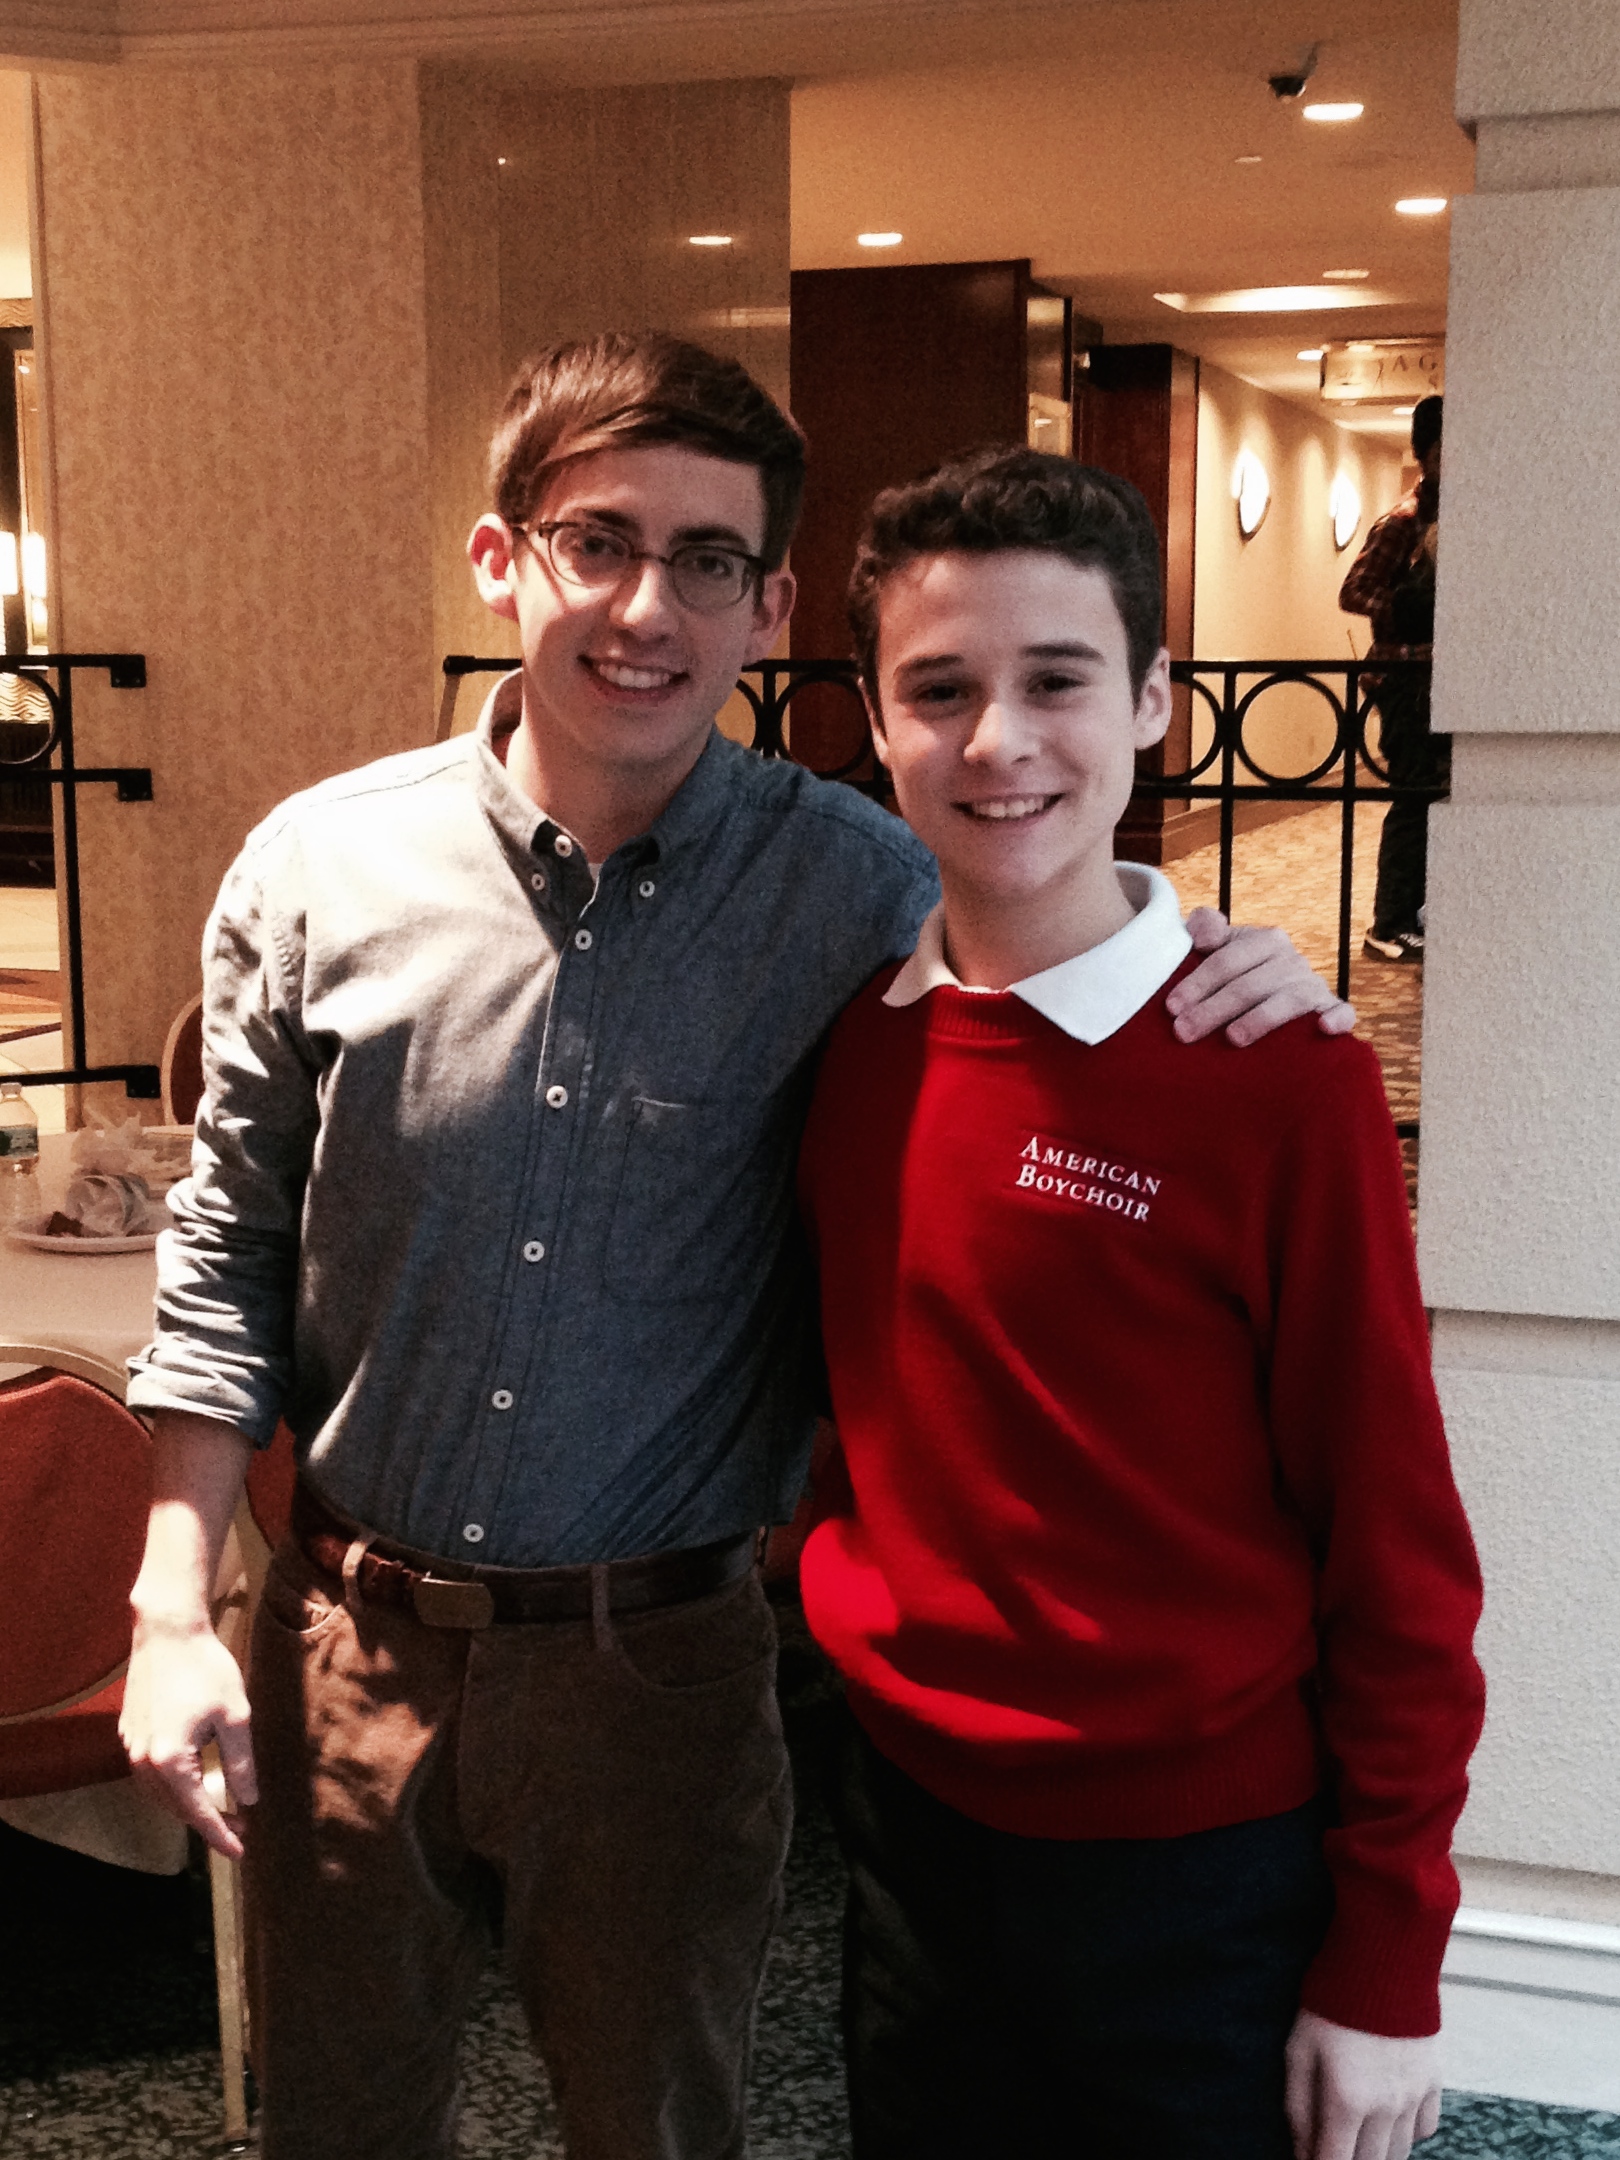 On set for the filming of Boychoir: Kevin McHale and Grant Venable